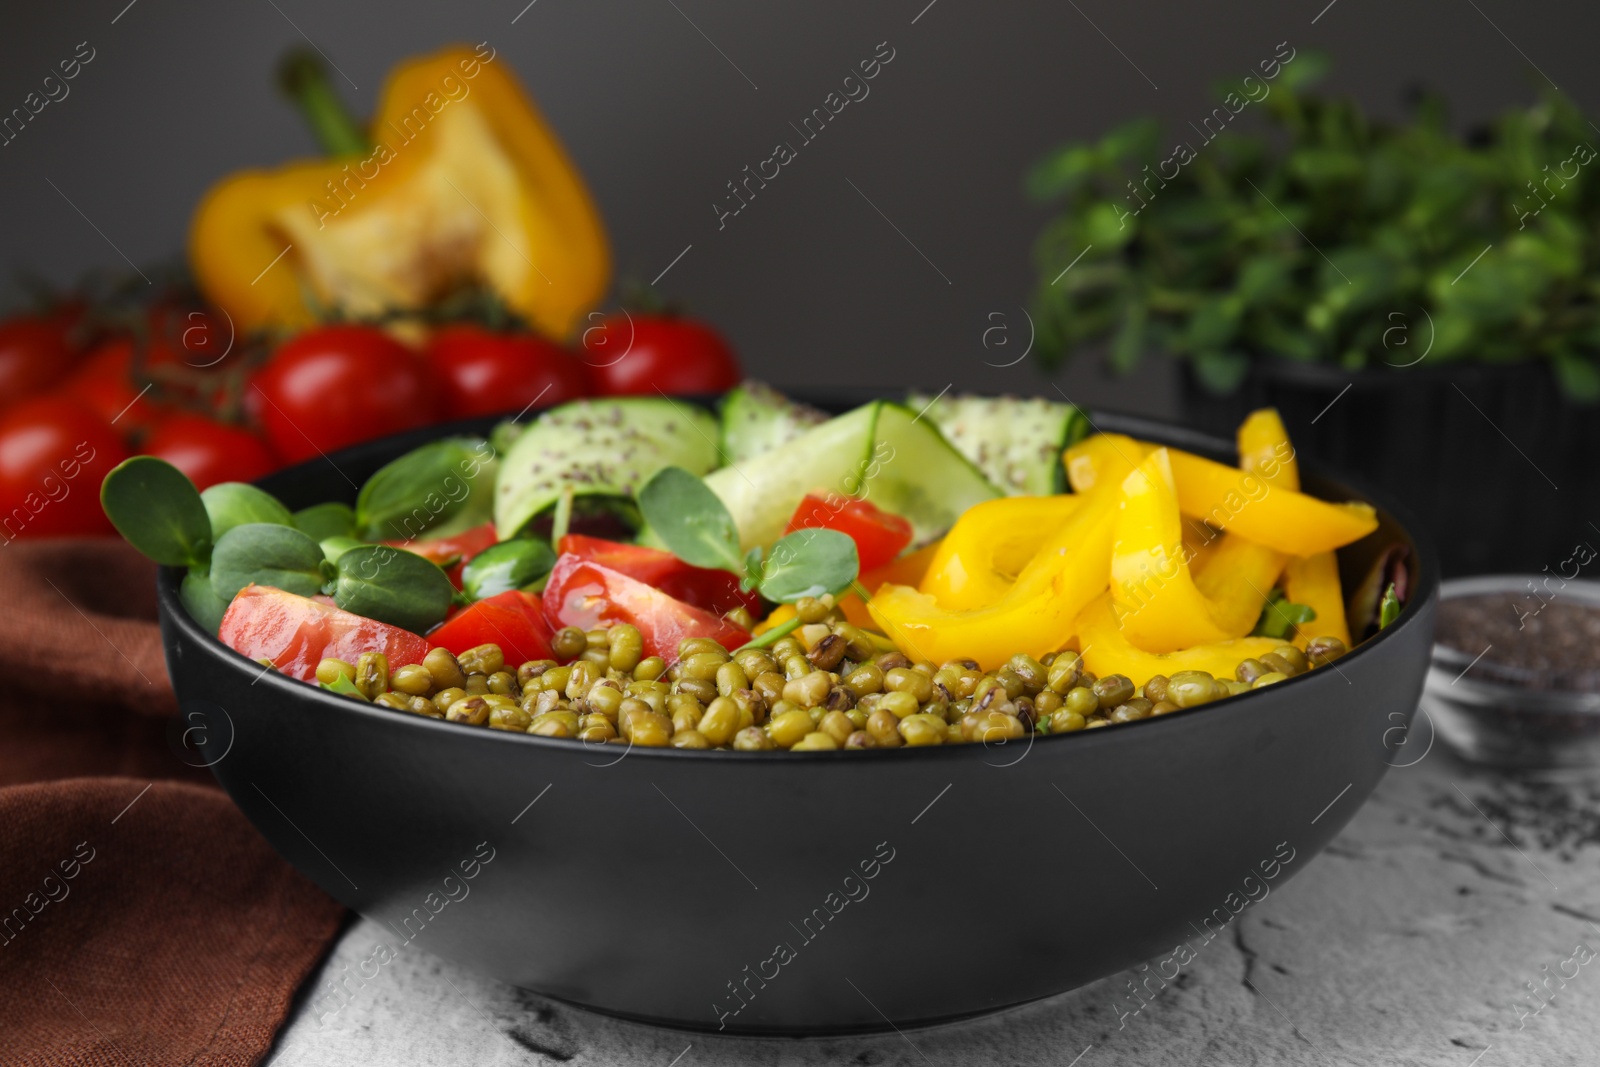 Photo of Bowl of salad with mung beans on white textured table